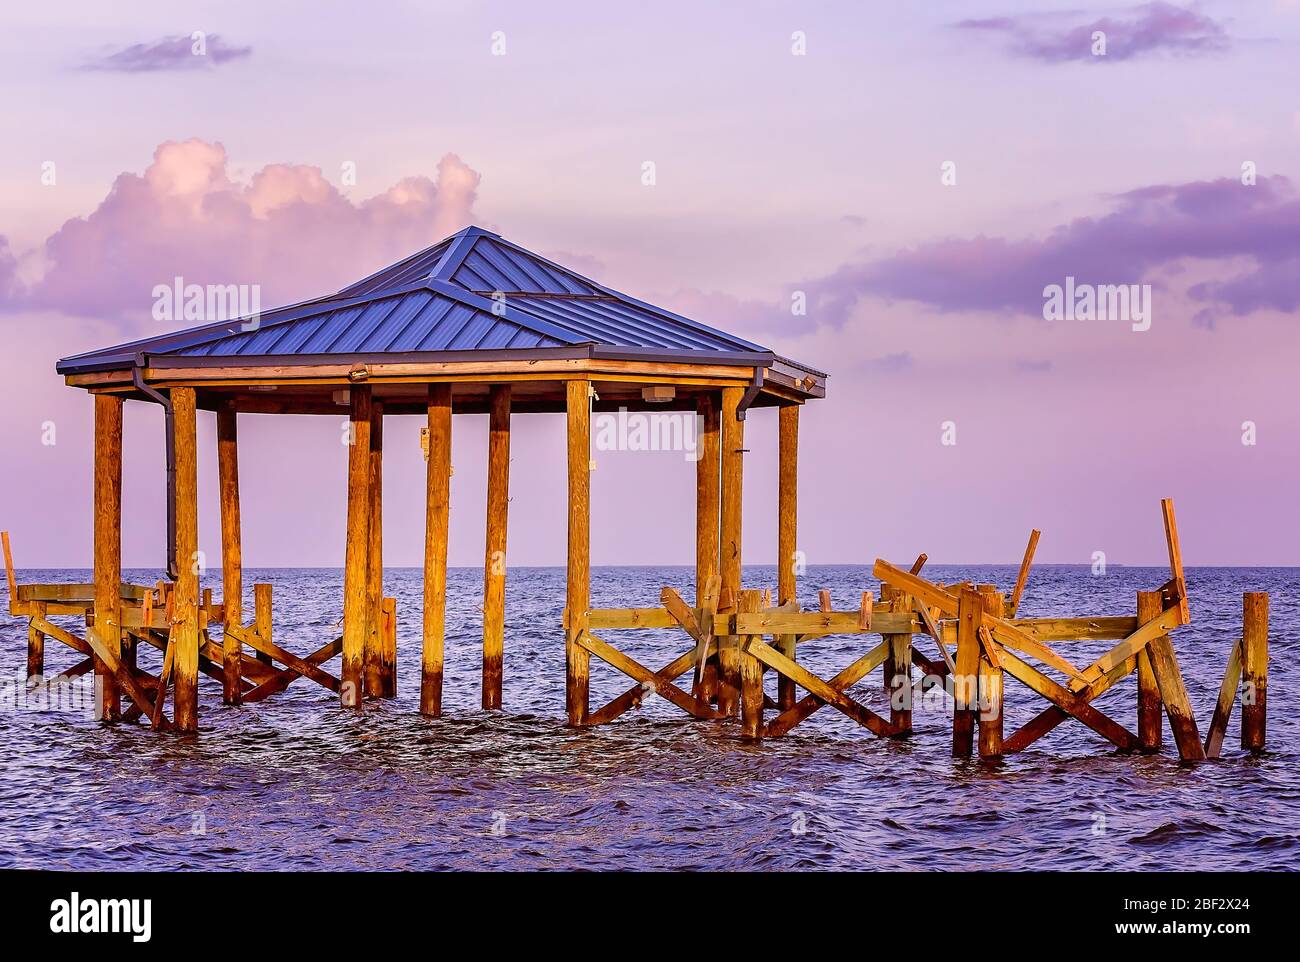 A pier, damaged by Hurricane Katrina in 2005, remains broken, June 27, 2013, in Pass Christian, Mississippi. Stock Photo